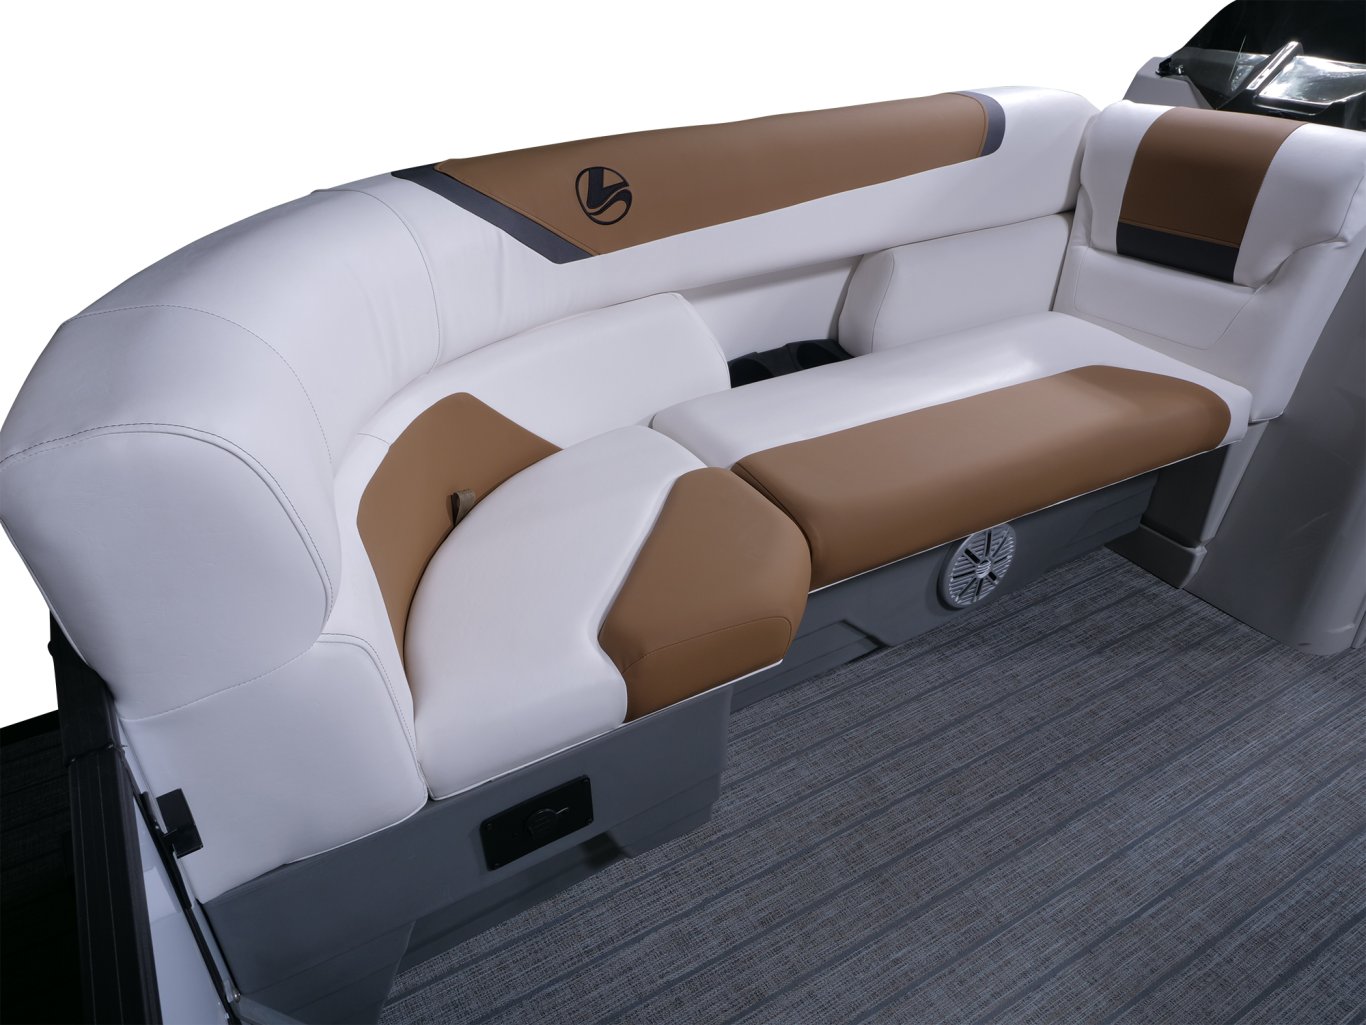 https://www.legendboats.com/wp-content/uploads/2021/01/e-series-cruise-ext-front-loungers-copy.png